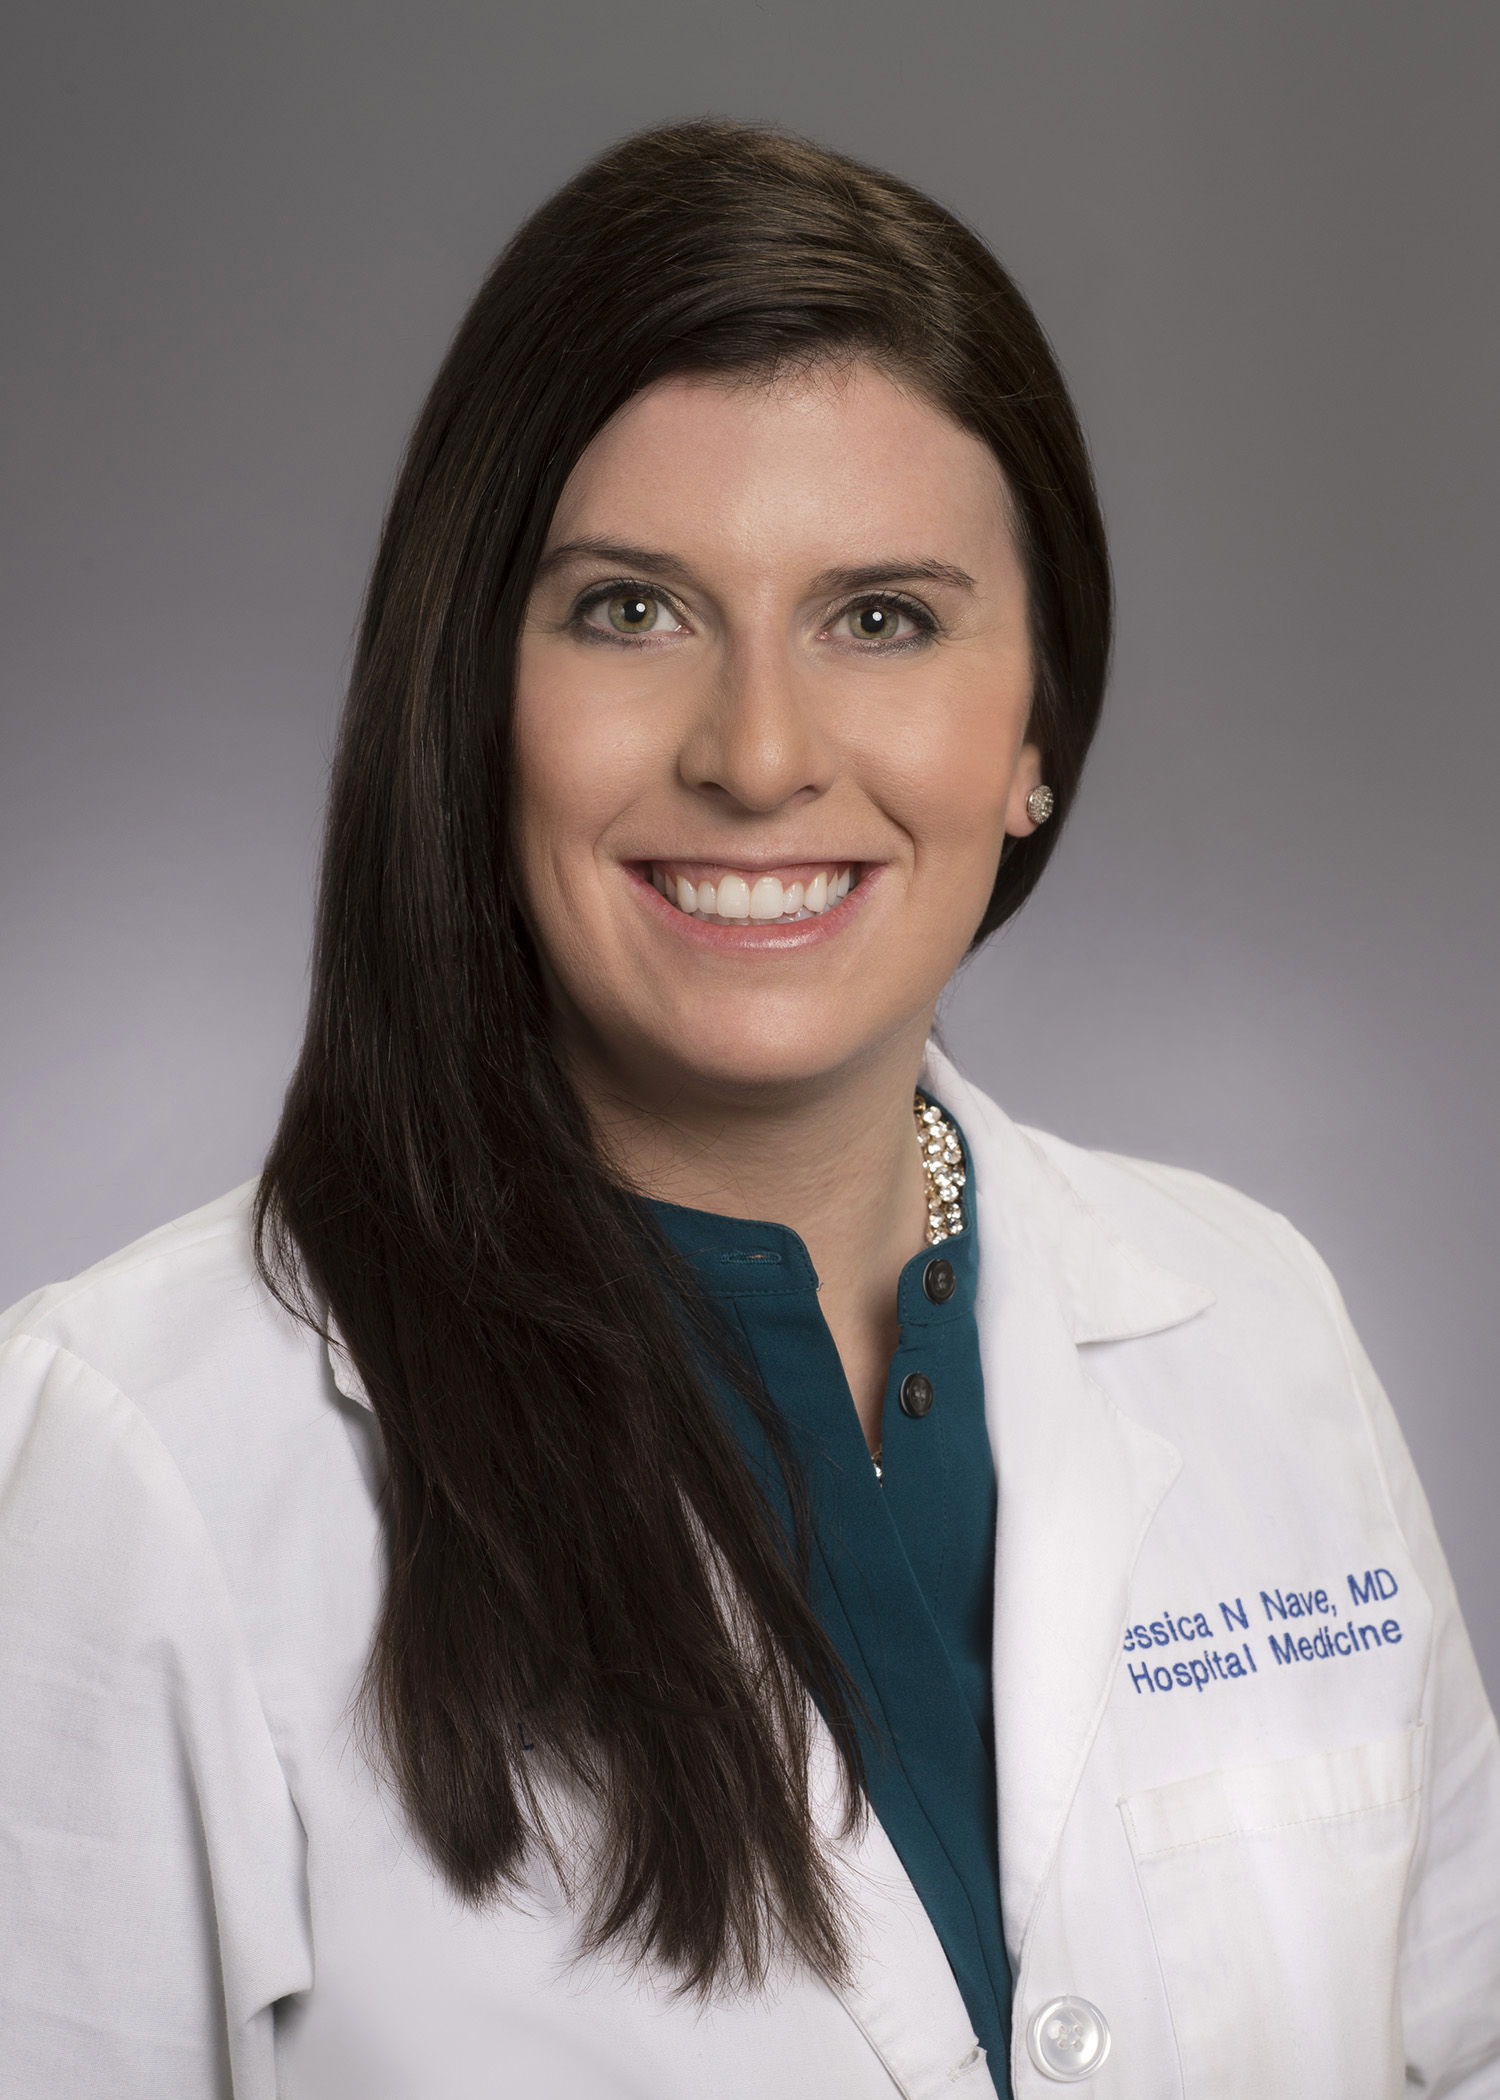 Dr. Jessica Nave